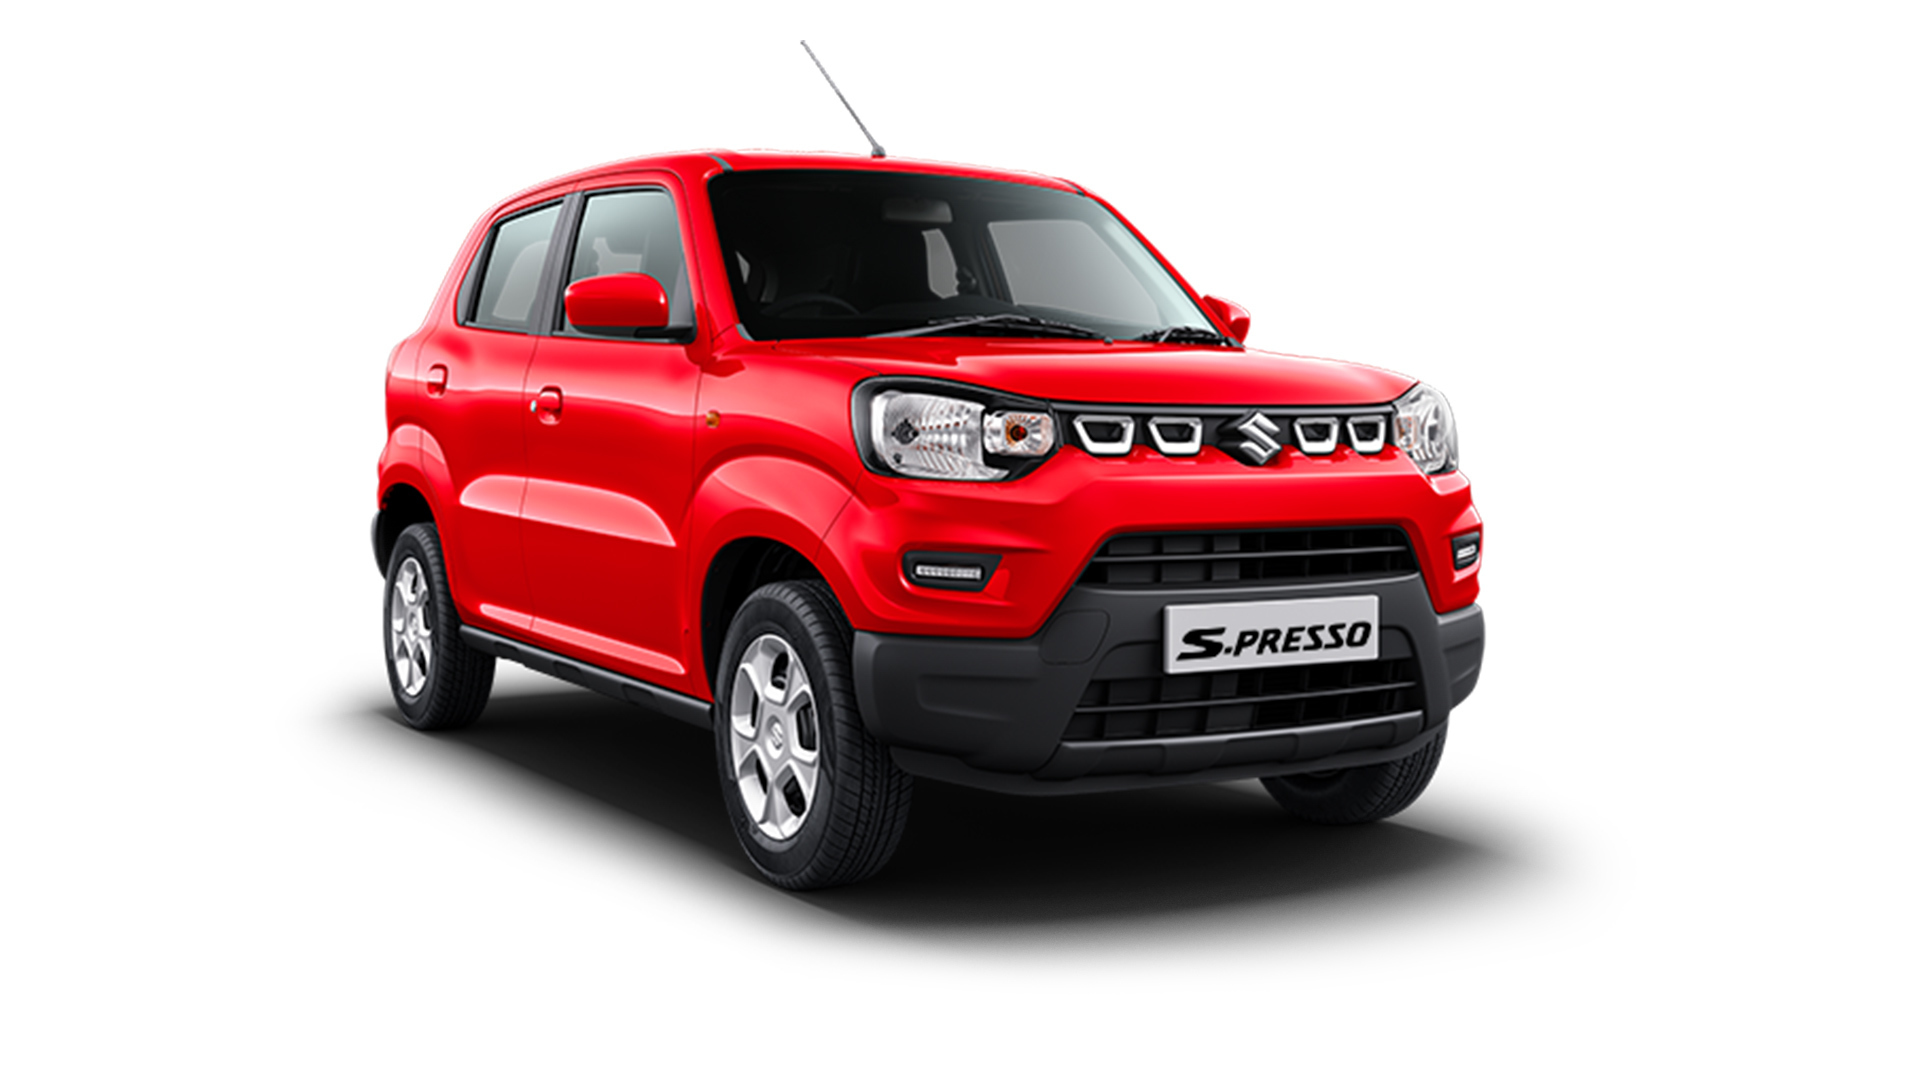 Drive your Solid Fire Red Maruti S-PRESSO home from Indus Motors 